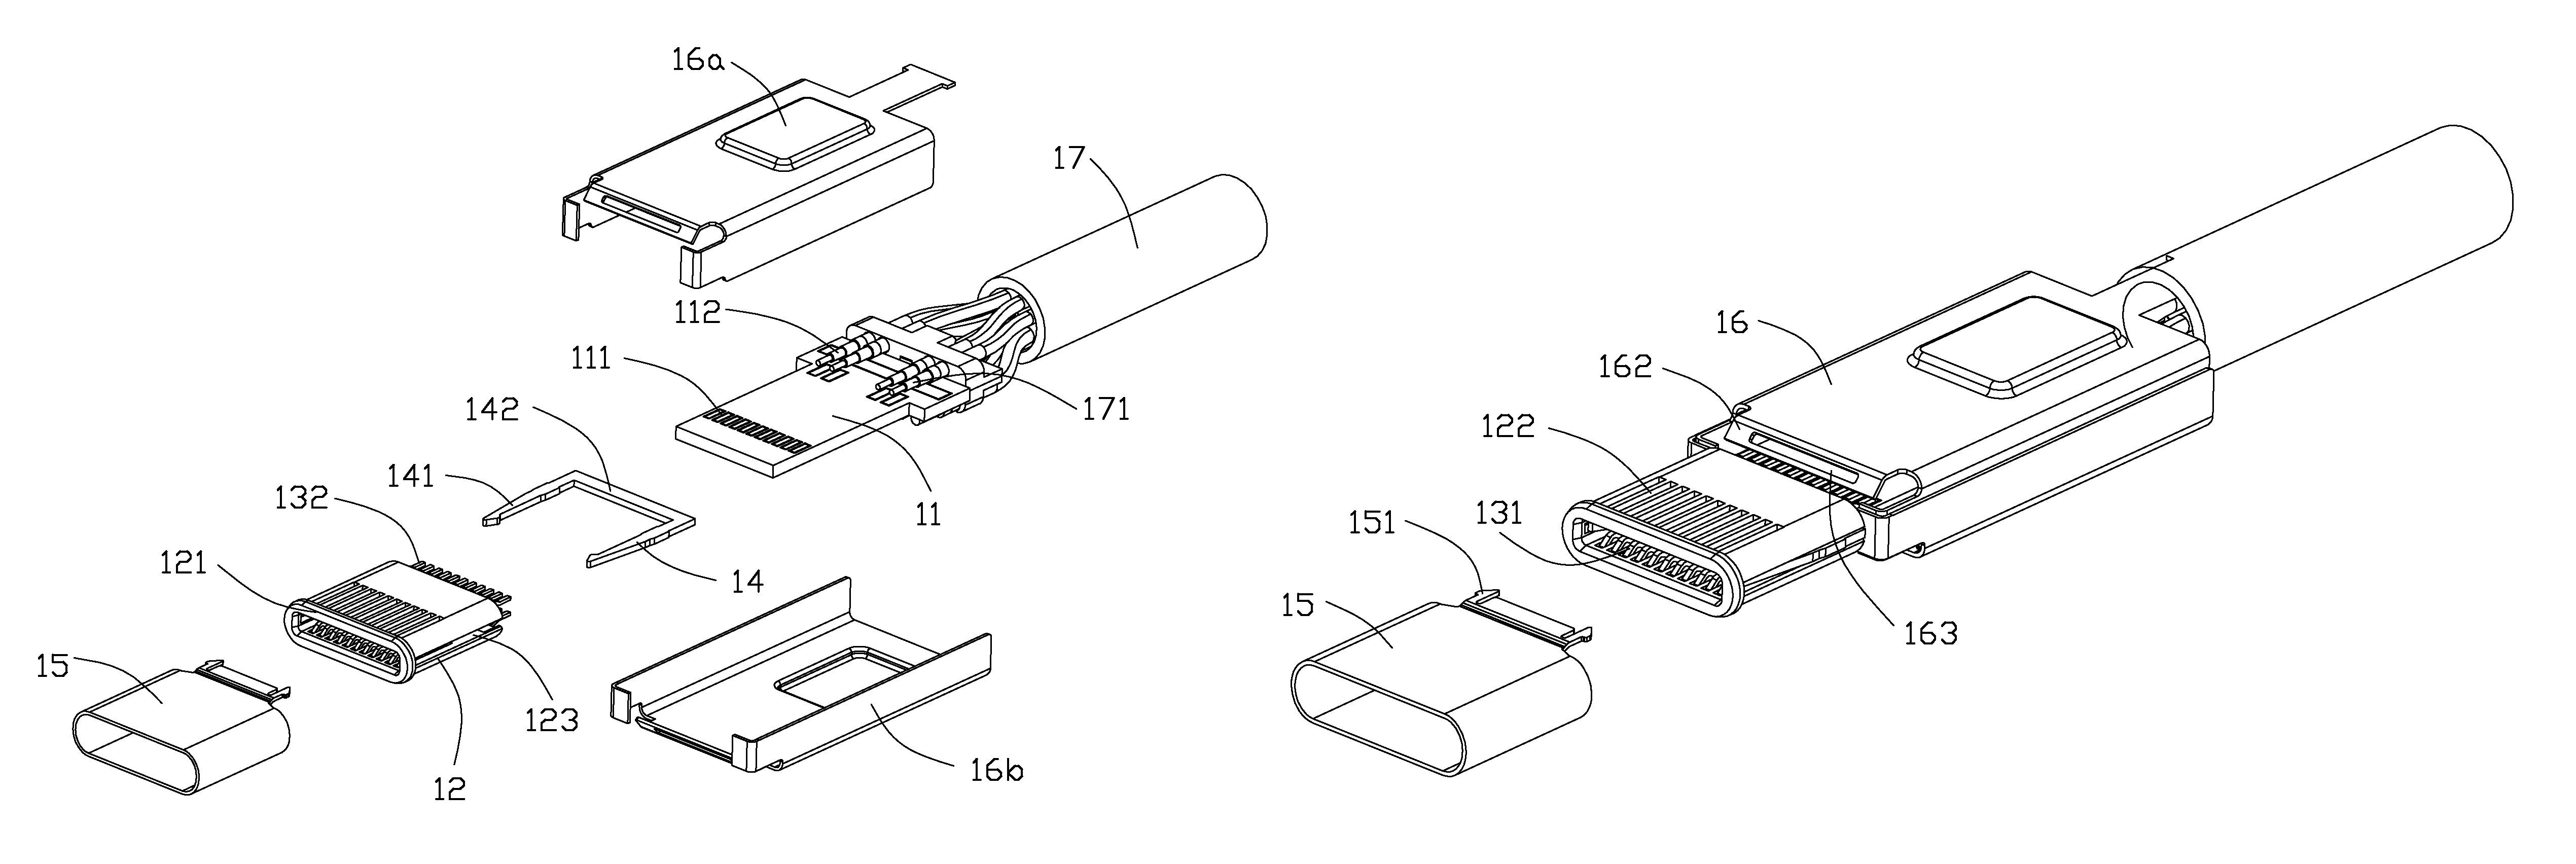 Electrical connector having a receptacle with a shielding plate and a mating plug with metallic side arms